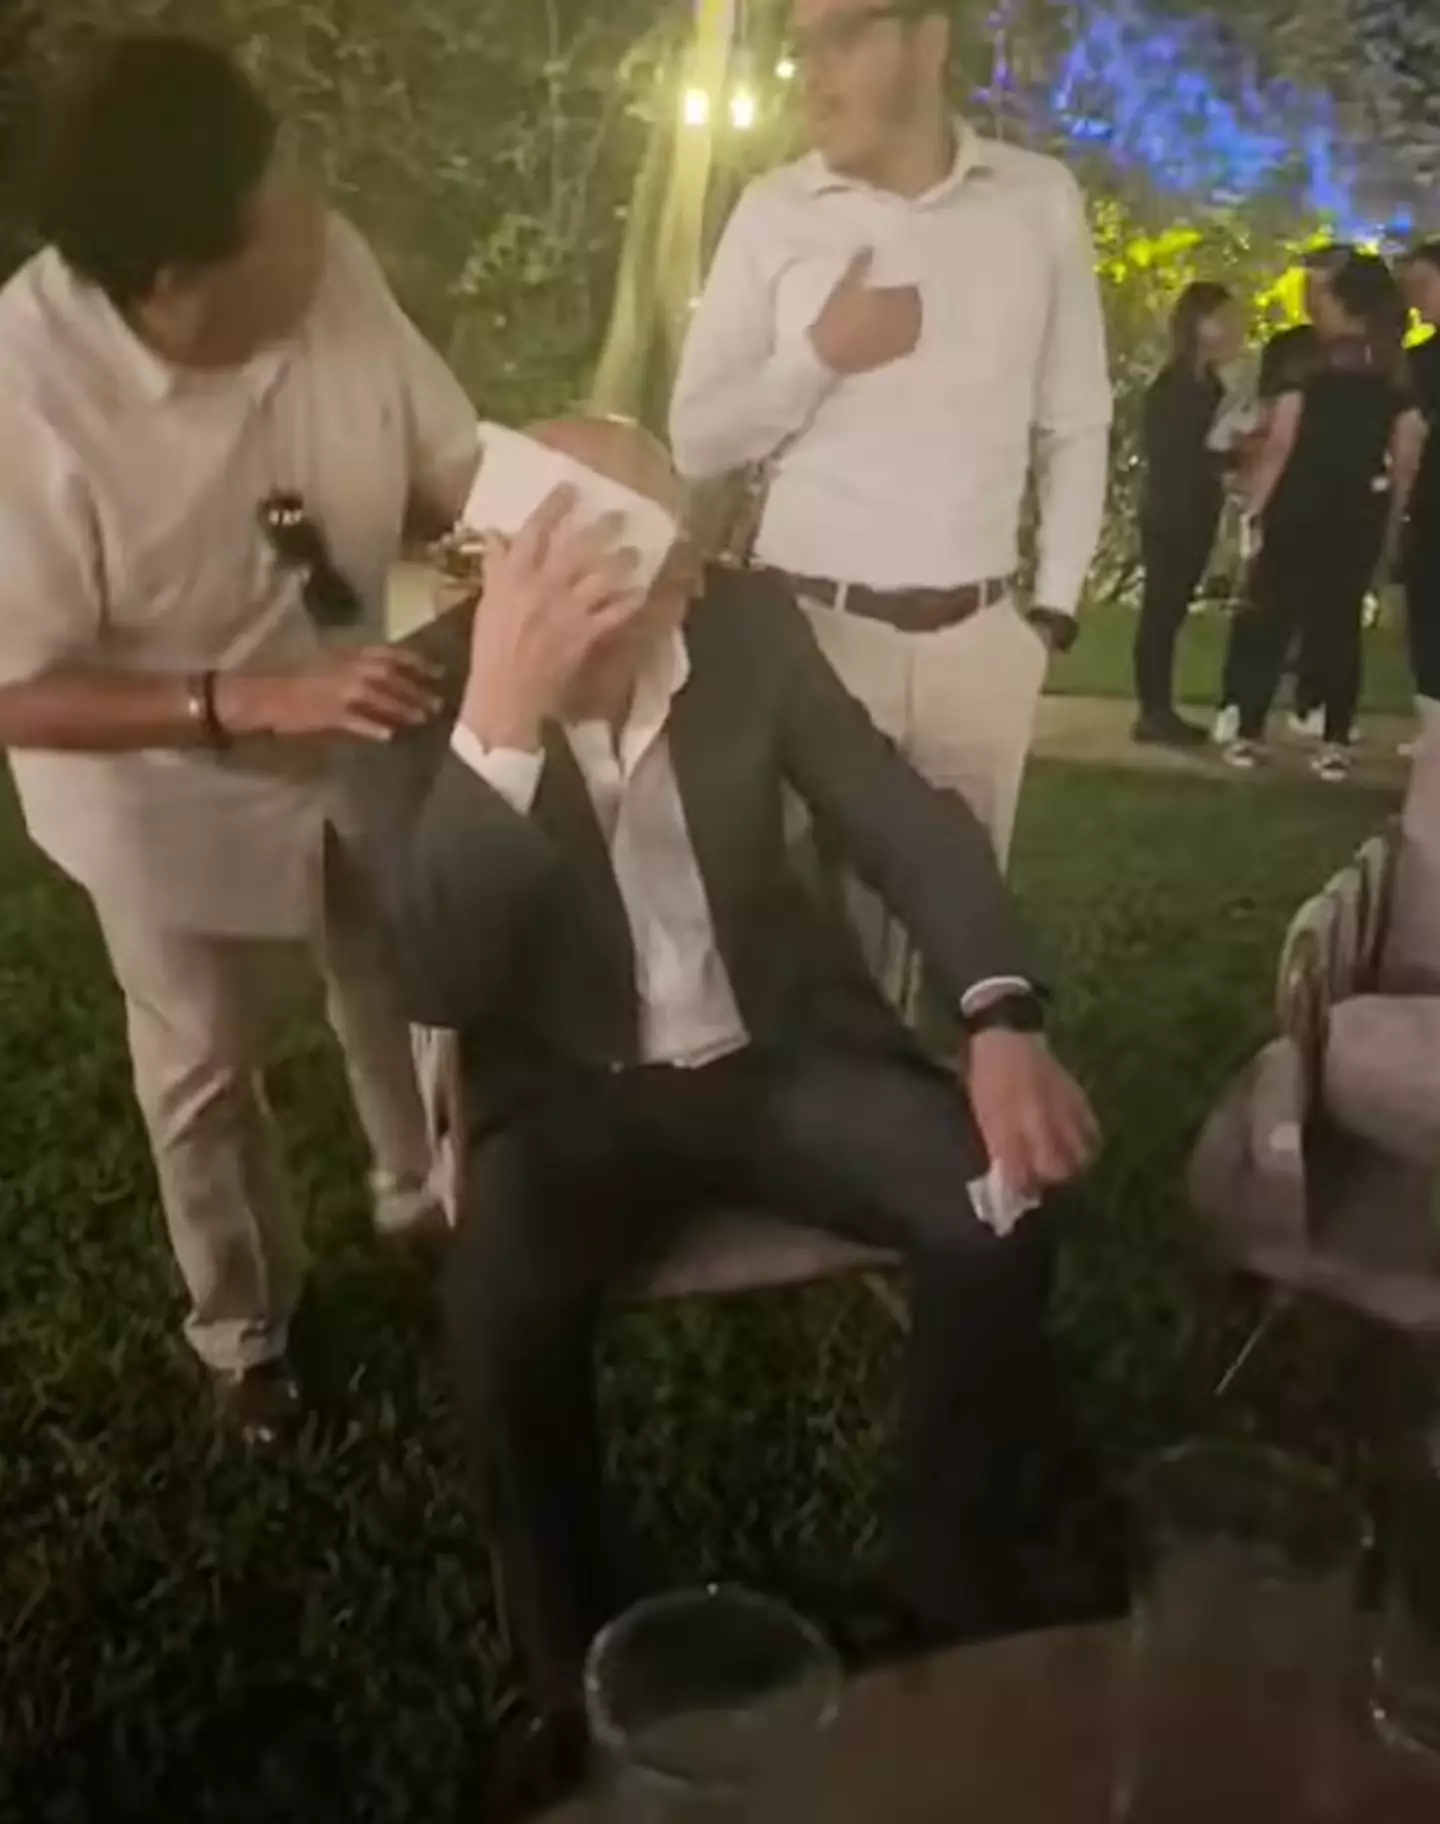 About 80 guests had to be taken to hospital after suffering terrible symptoms after eating food at this wedding in Mexico.(Facebook/Radioformulapr)